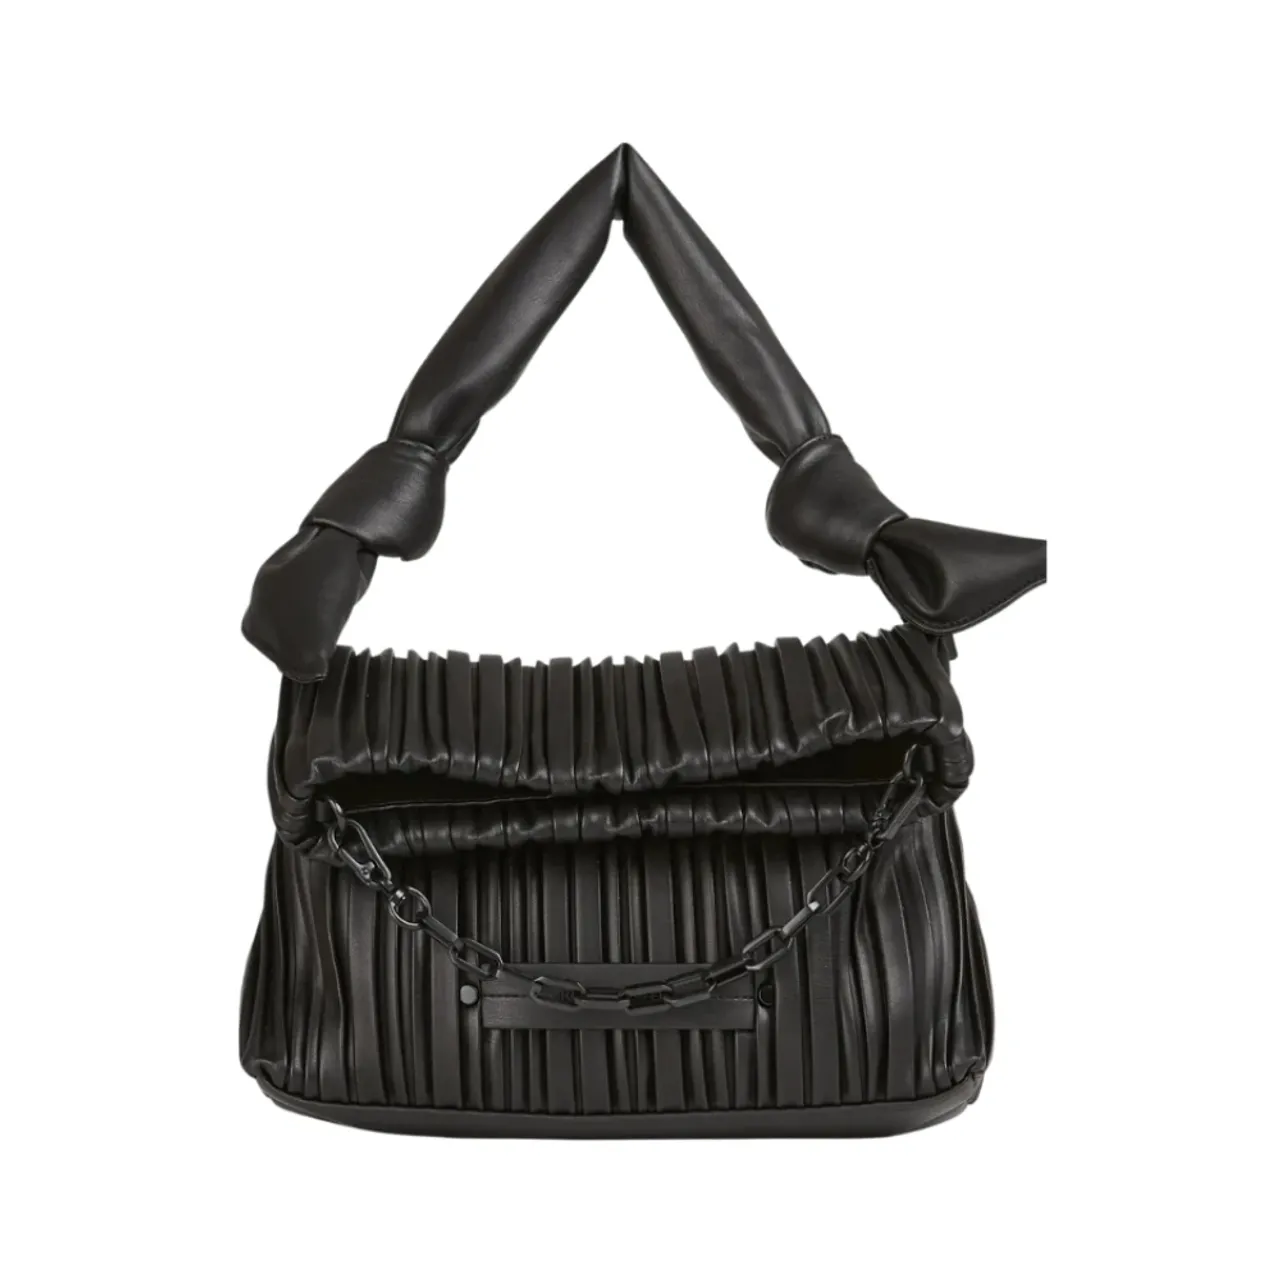 K/Kushion Knotted SM Fold Tote Tasche Karl Lagerfeld